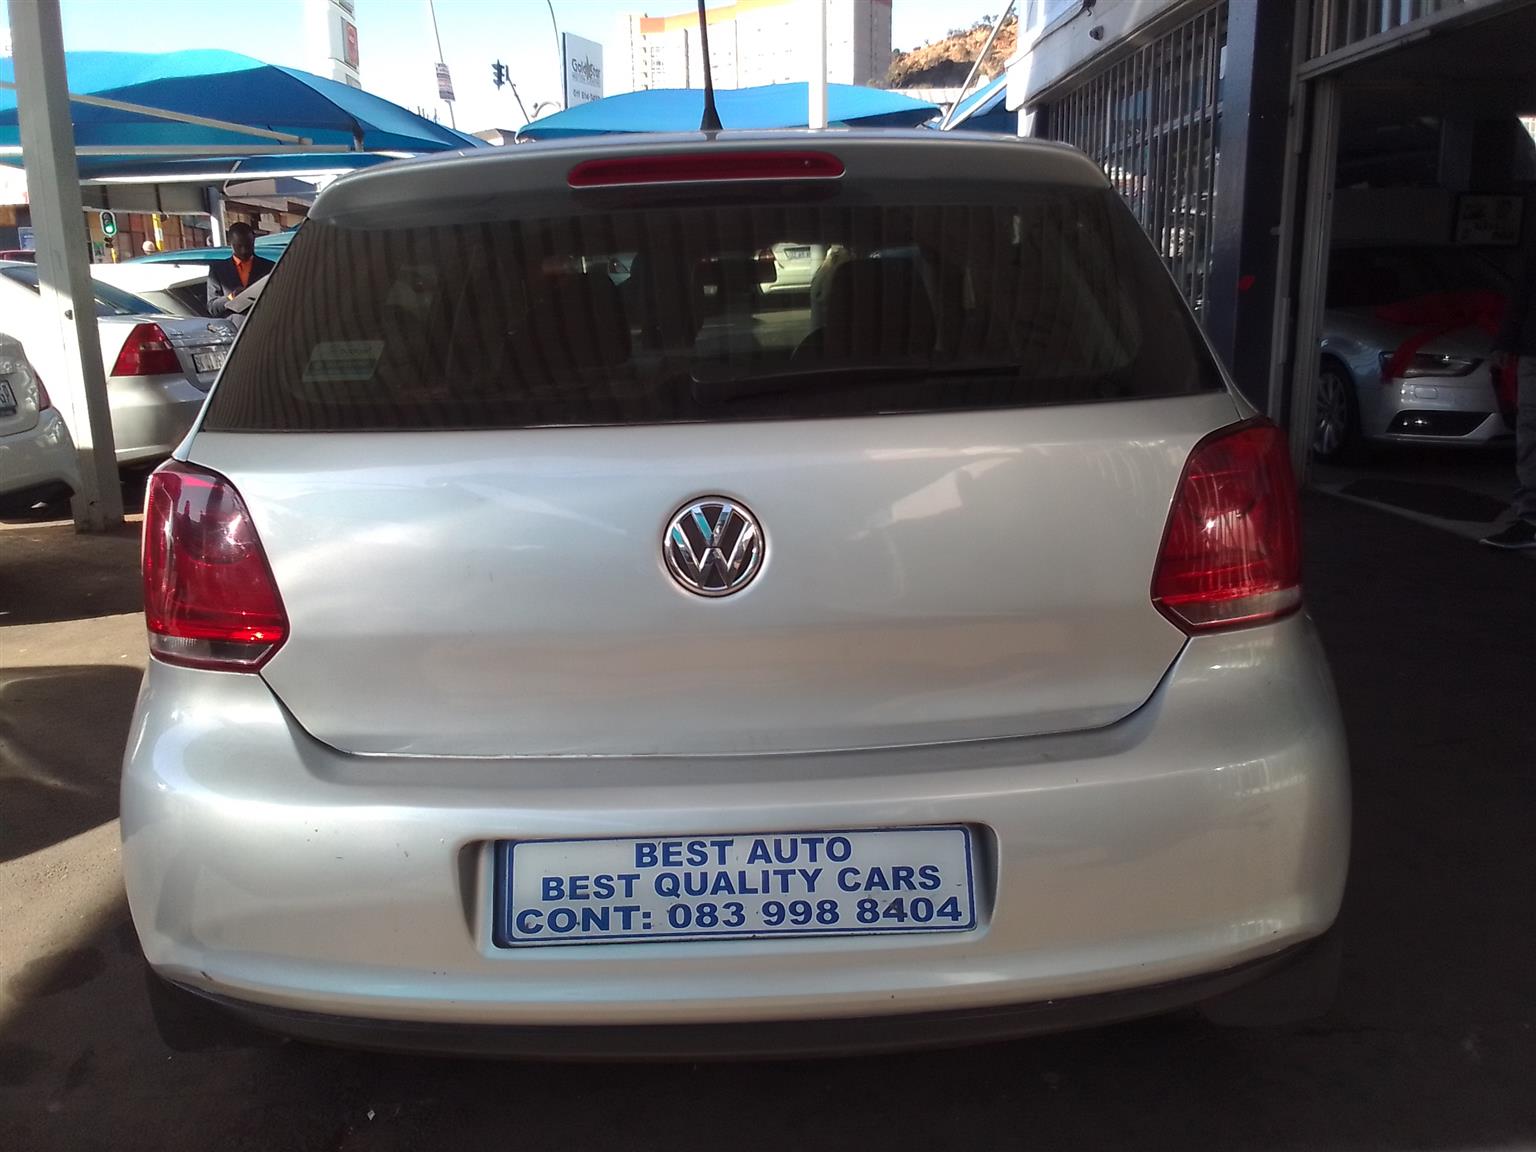 2012 VW Polo 6 1.4 Engine Capacity with Manuel Transmission,